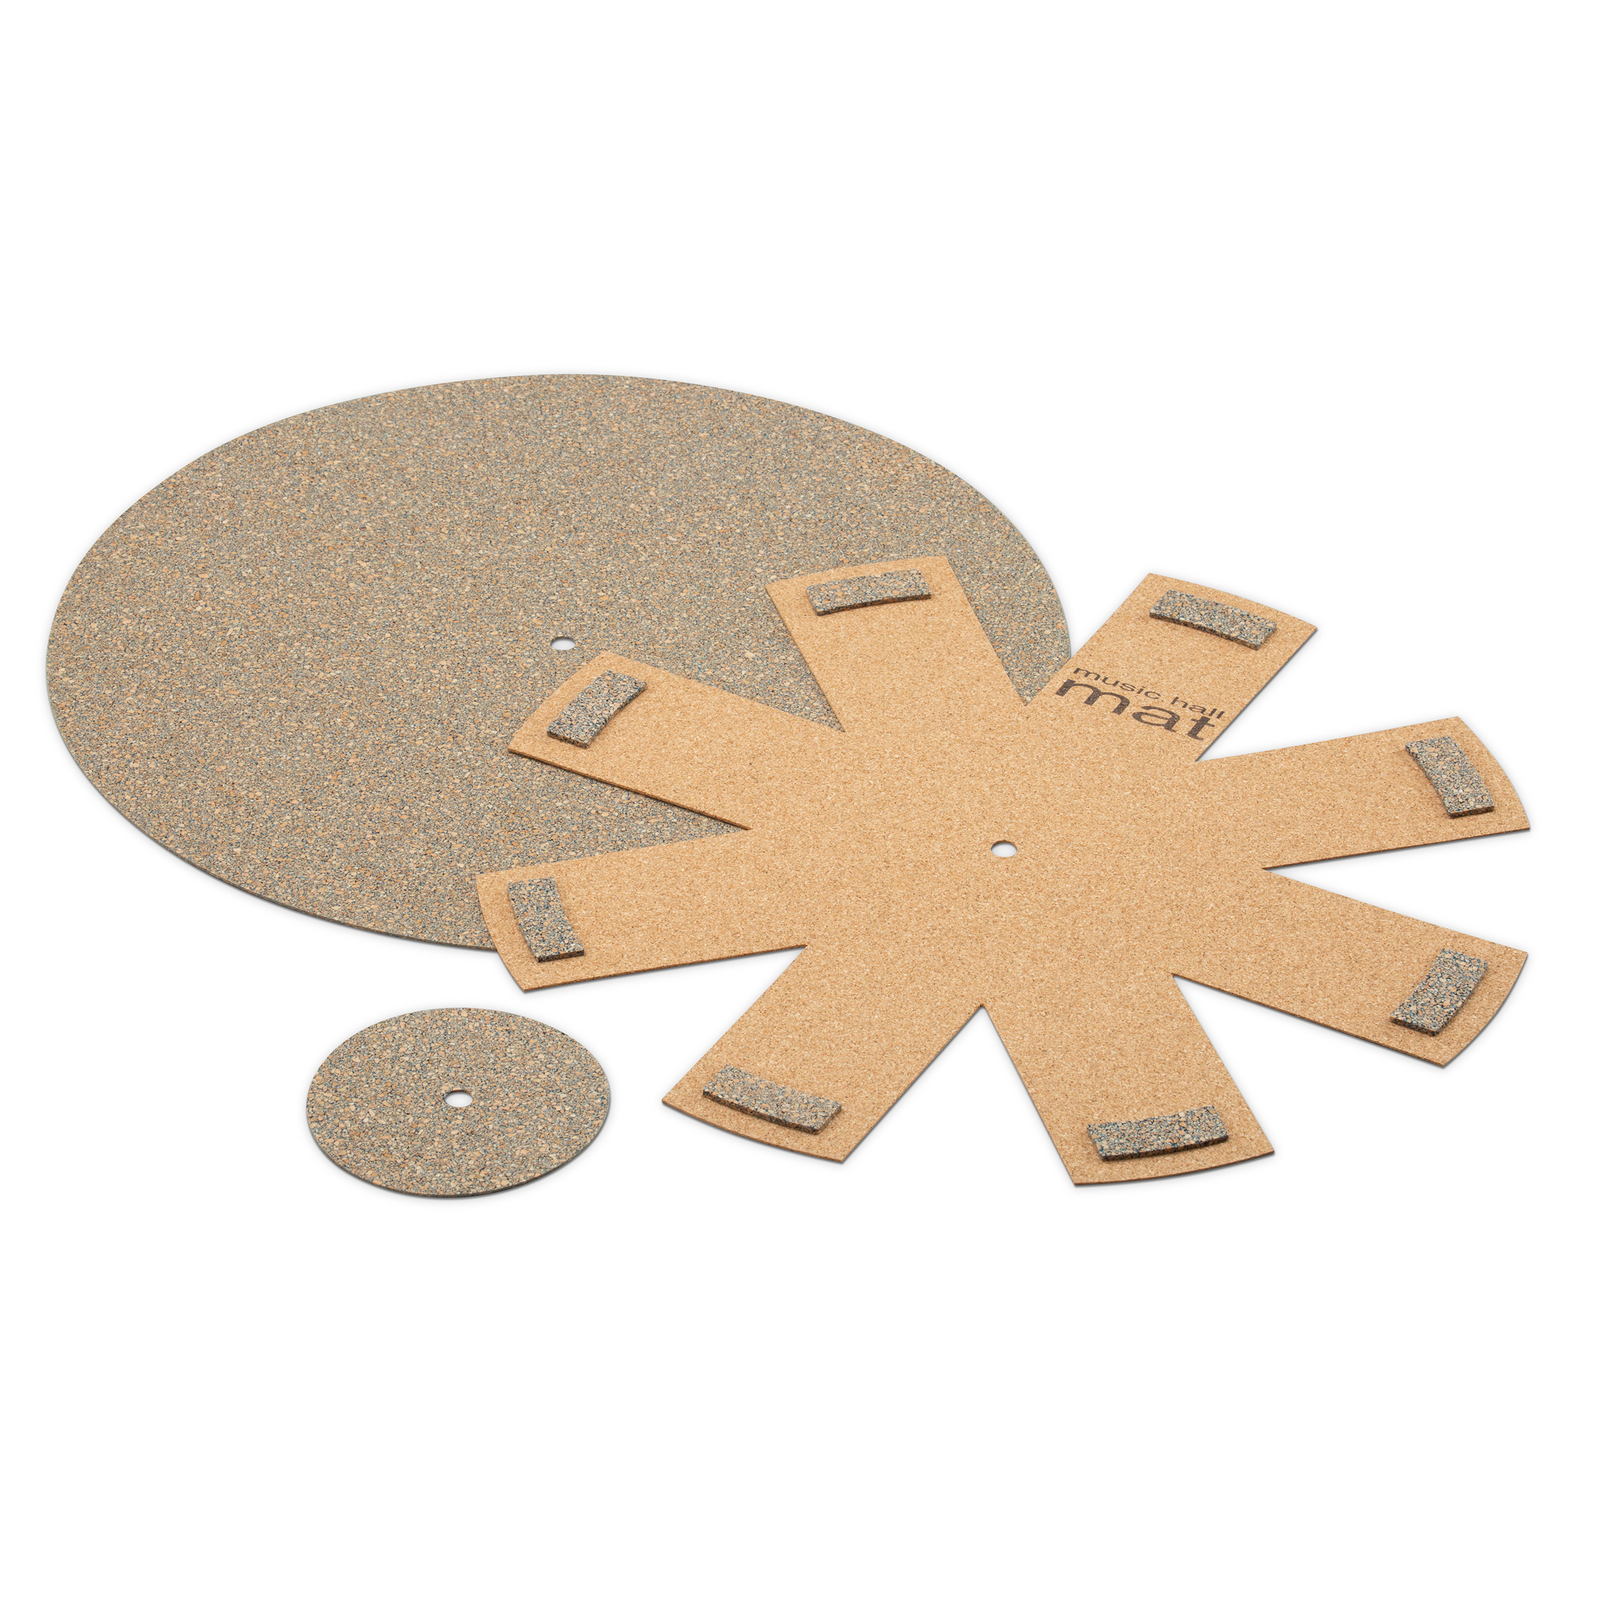 Product highlights: 3 layers of cork decouple and isolate your records Grips platter and lifts record above it Reduces vibration and acoustic feedback Improves stylus tracking and reduces record wear Cork material absorbs unwanted vibrations and releases energy Non-static and non-adhesive, safe for all platters and records Grips record better than felt, reducing slippage and errors